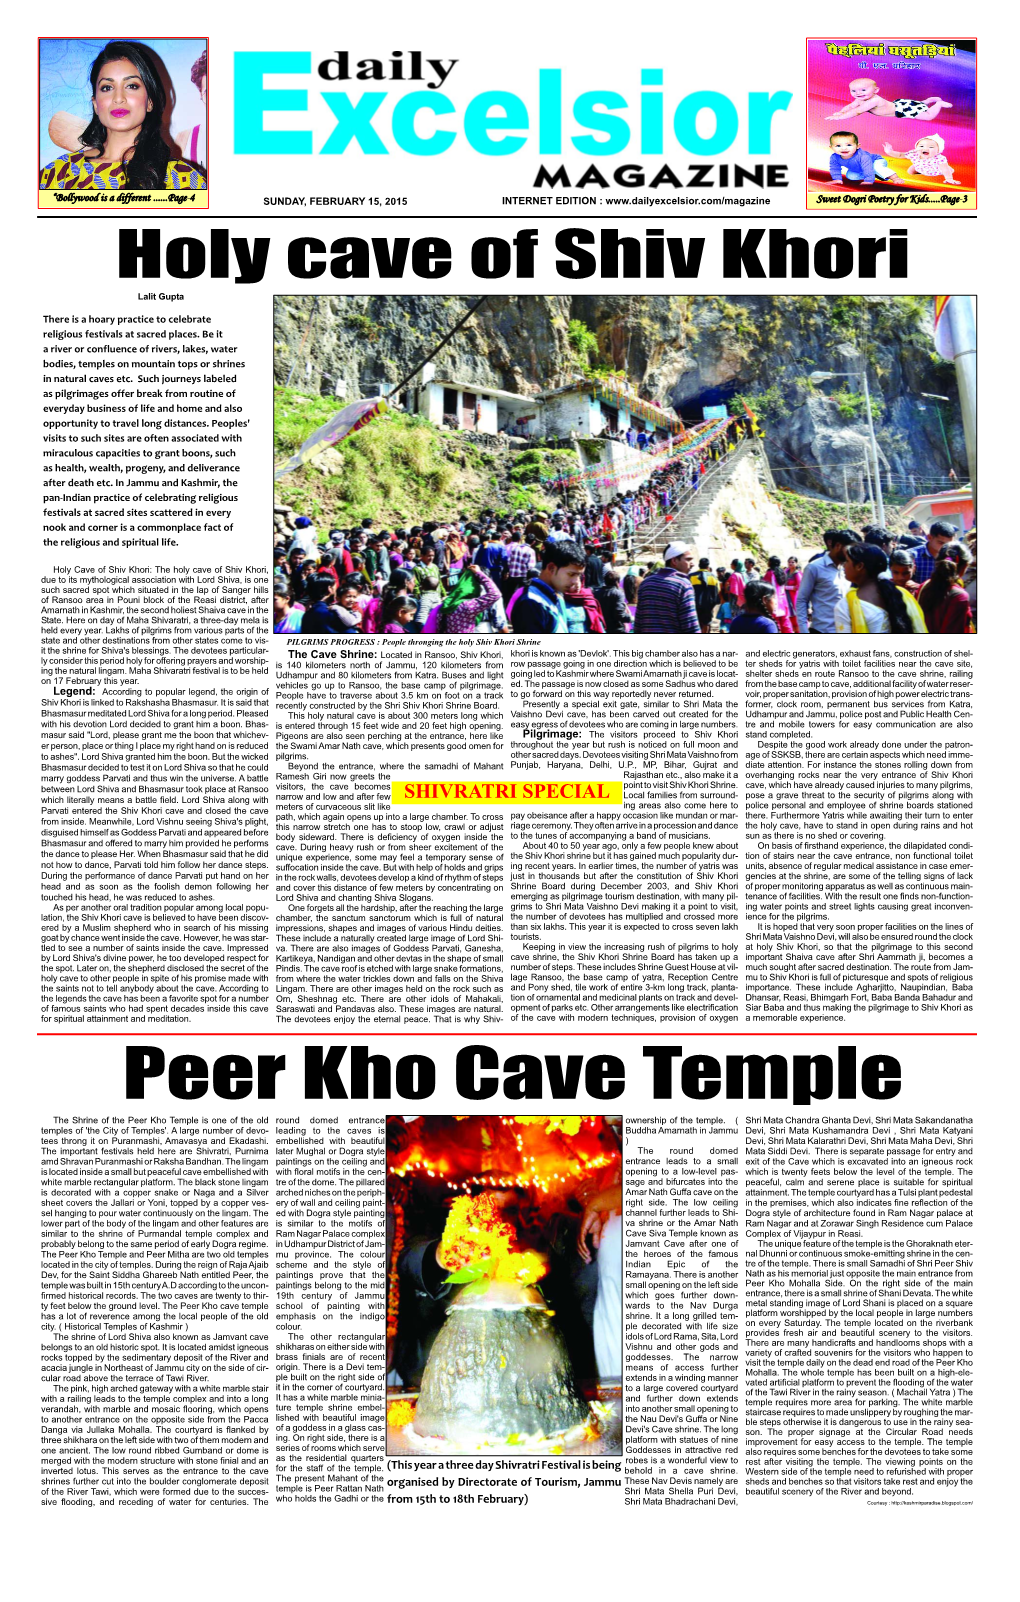 Peer Kho Cave Temple the Shrine of the Peer Kho Temple Is One of the Old Round Domed Entrance Ownership of the Temple